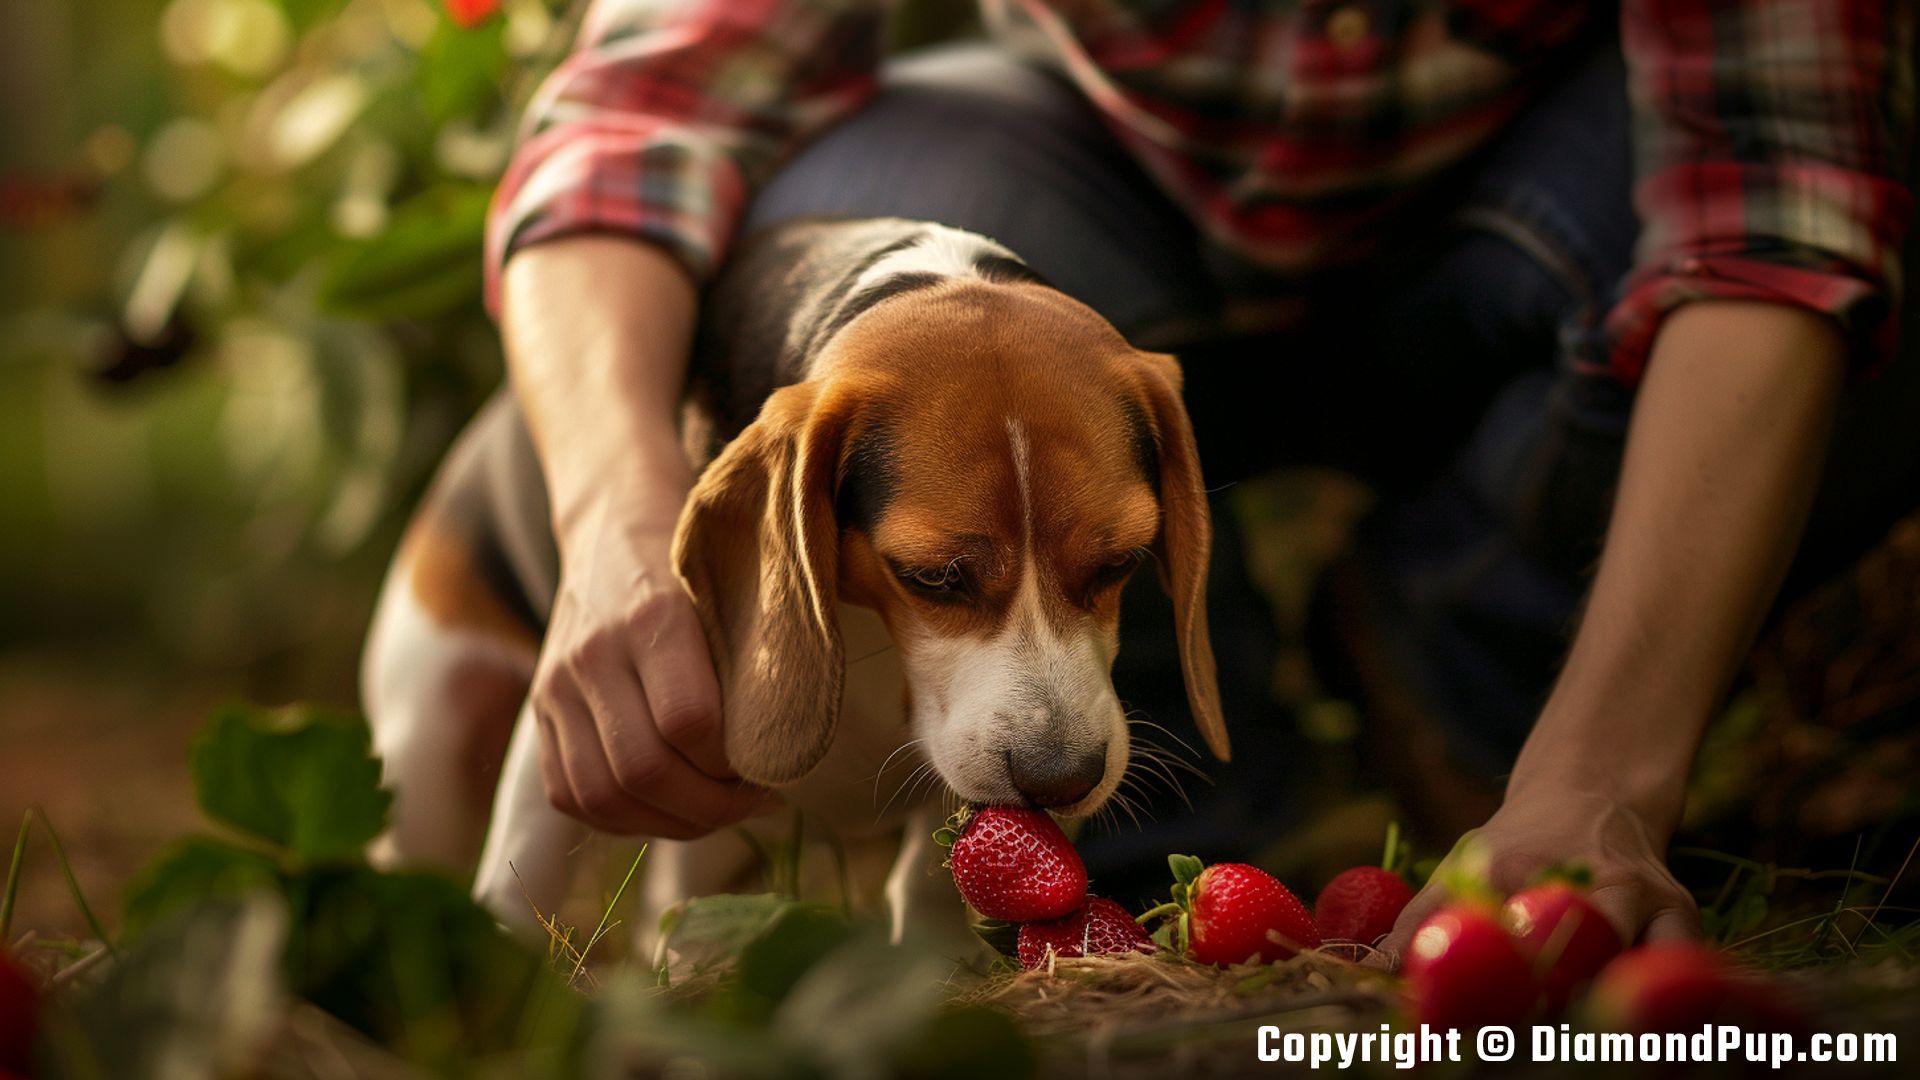 Photograph of Beagle Snacking on Strawberries